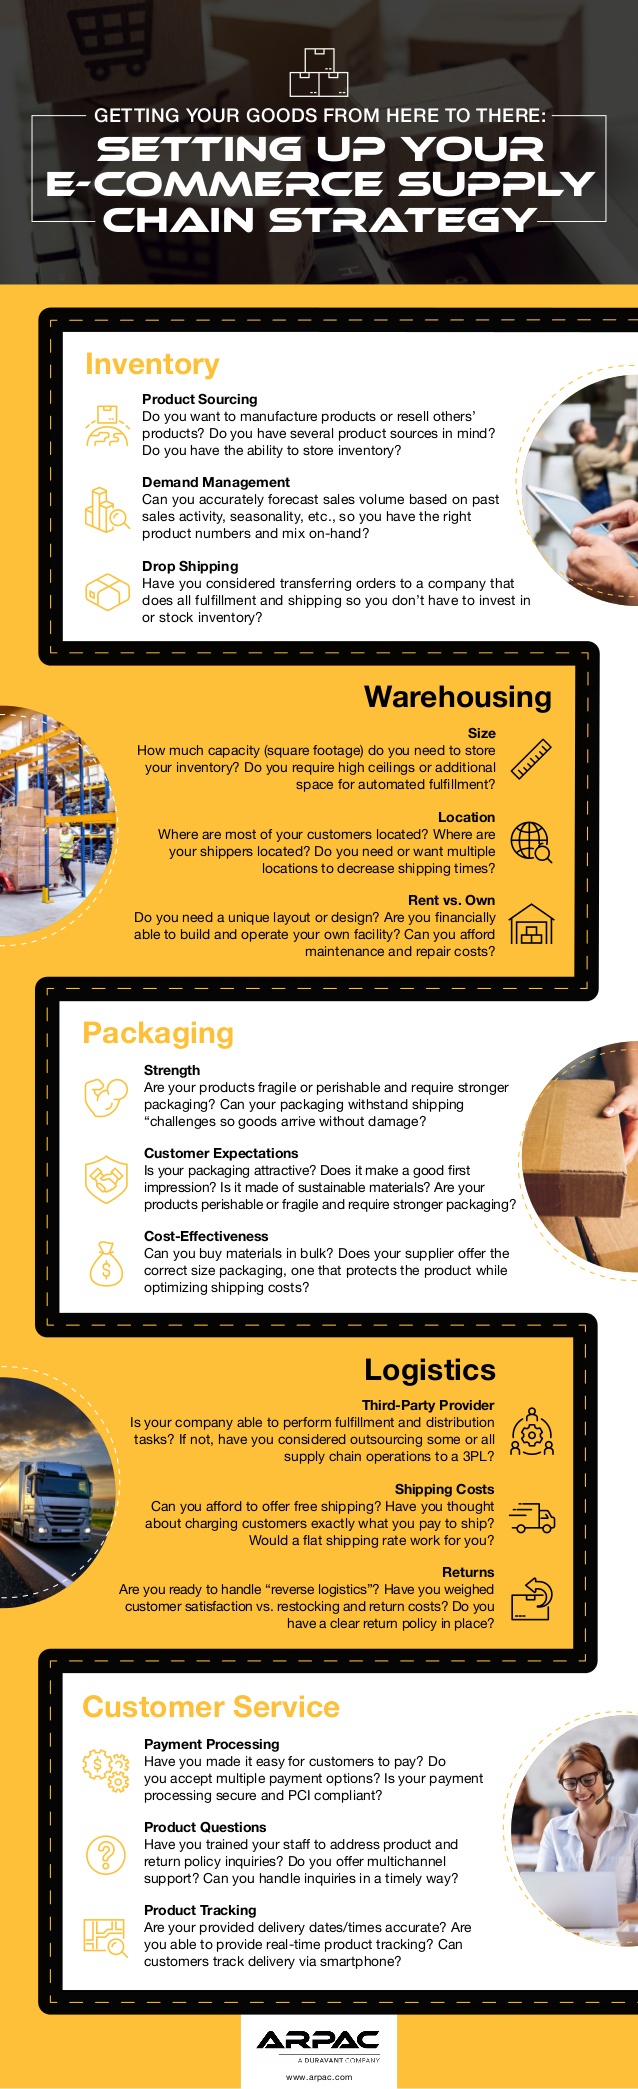 setting-up-your-ecommerce-supply-chain-1-638